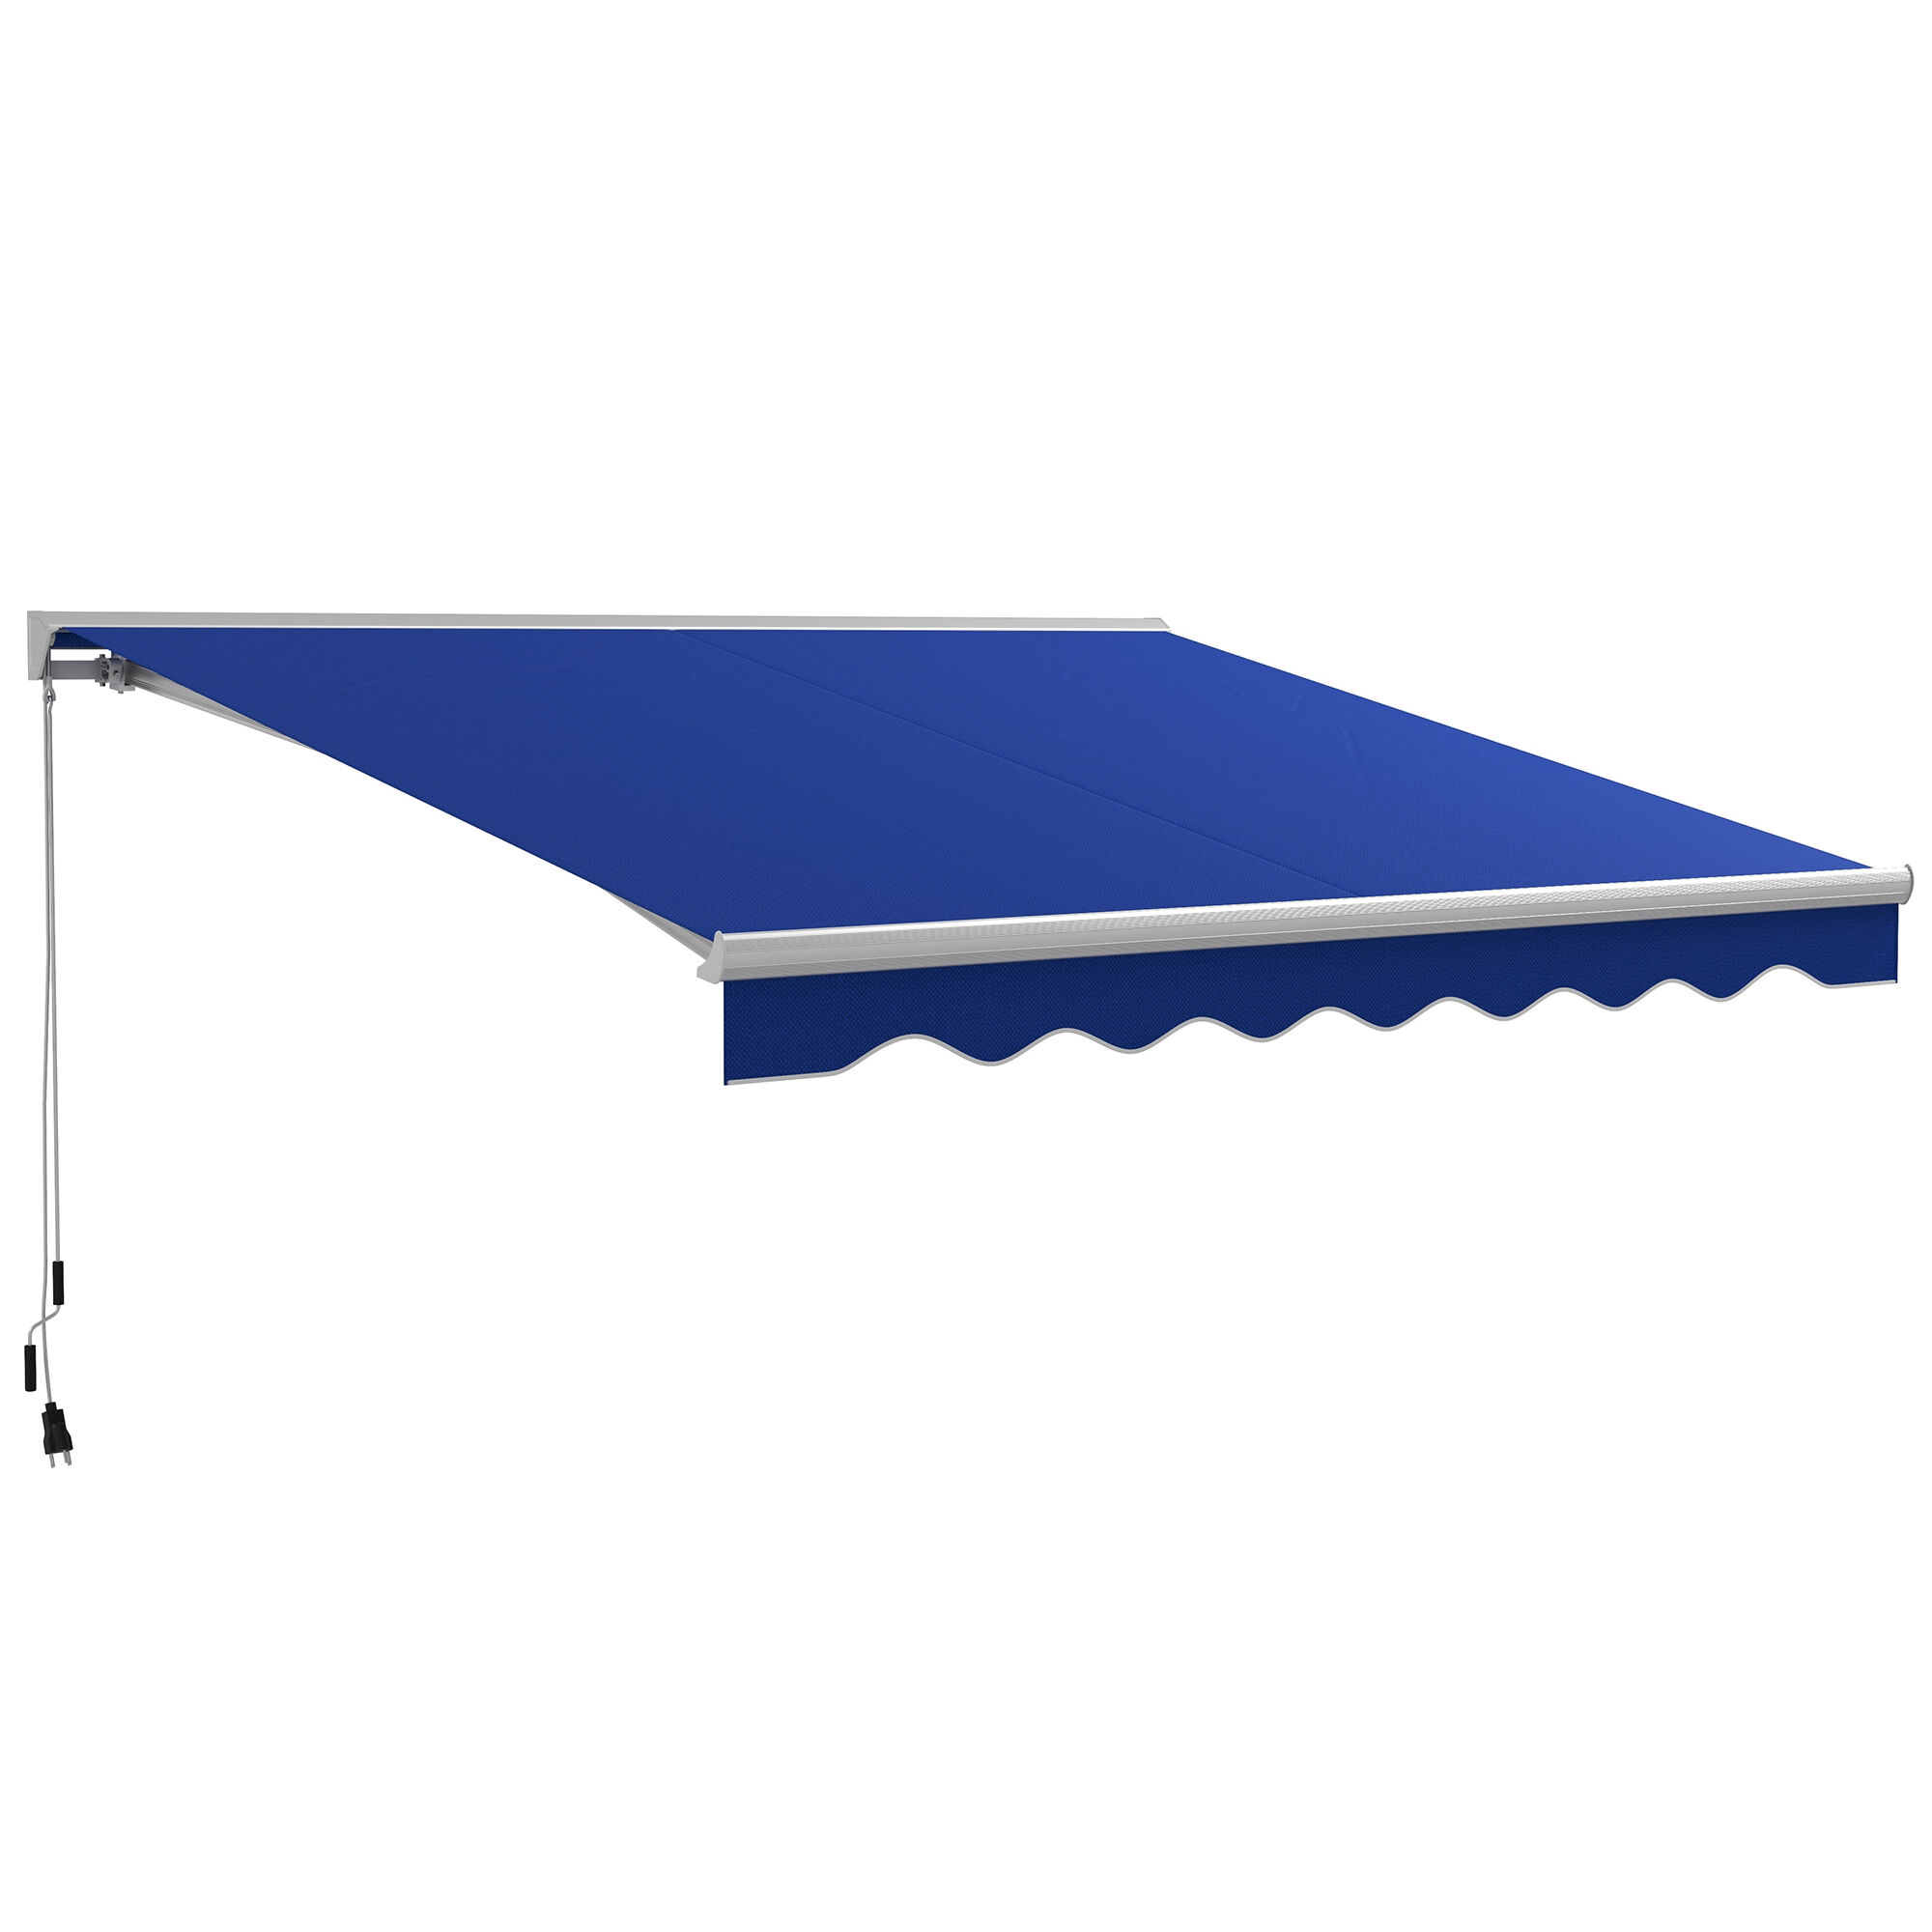 Outsunny Electric Awning 13x10 with LED Remote Control for Outdoor Patio Blue   Aosom.com